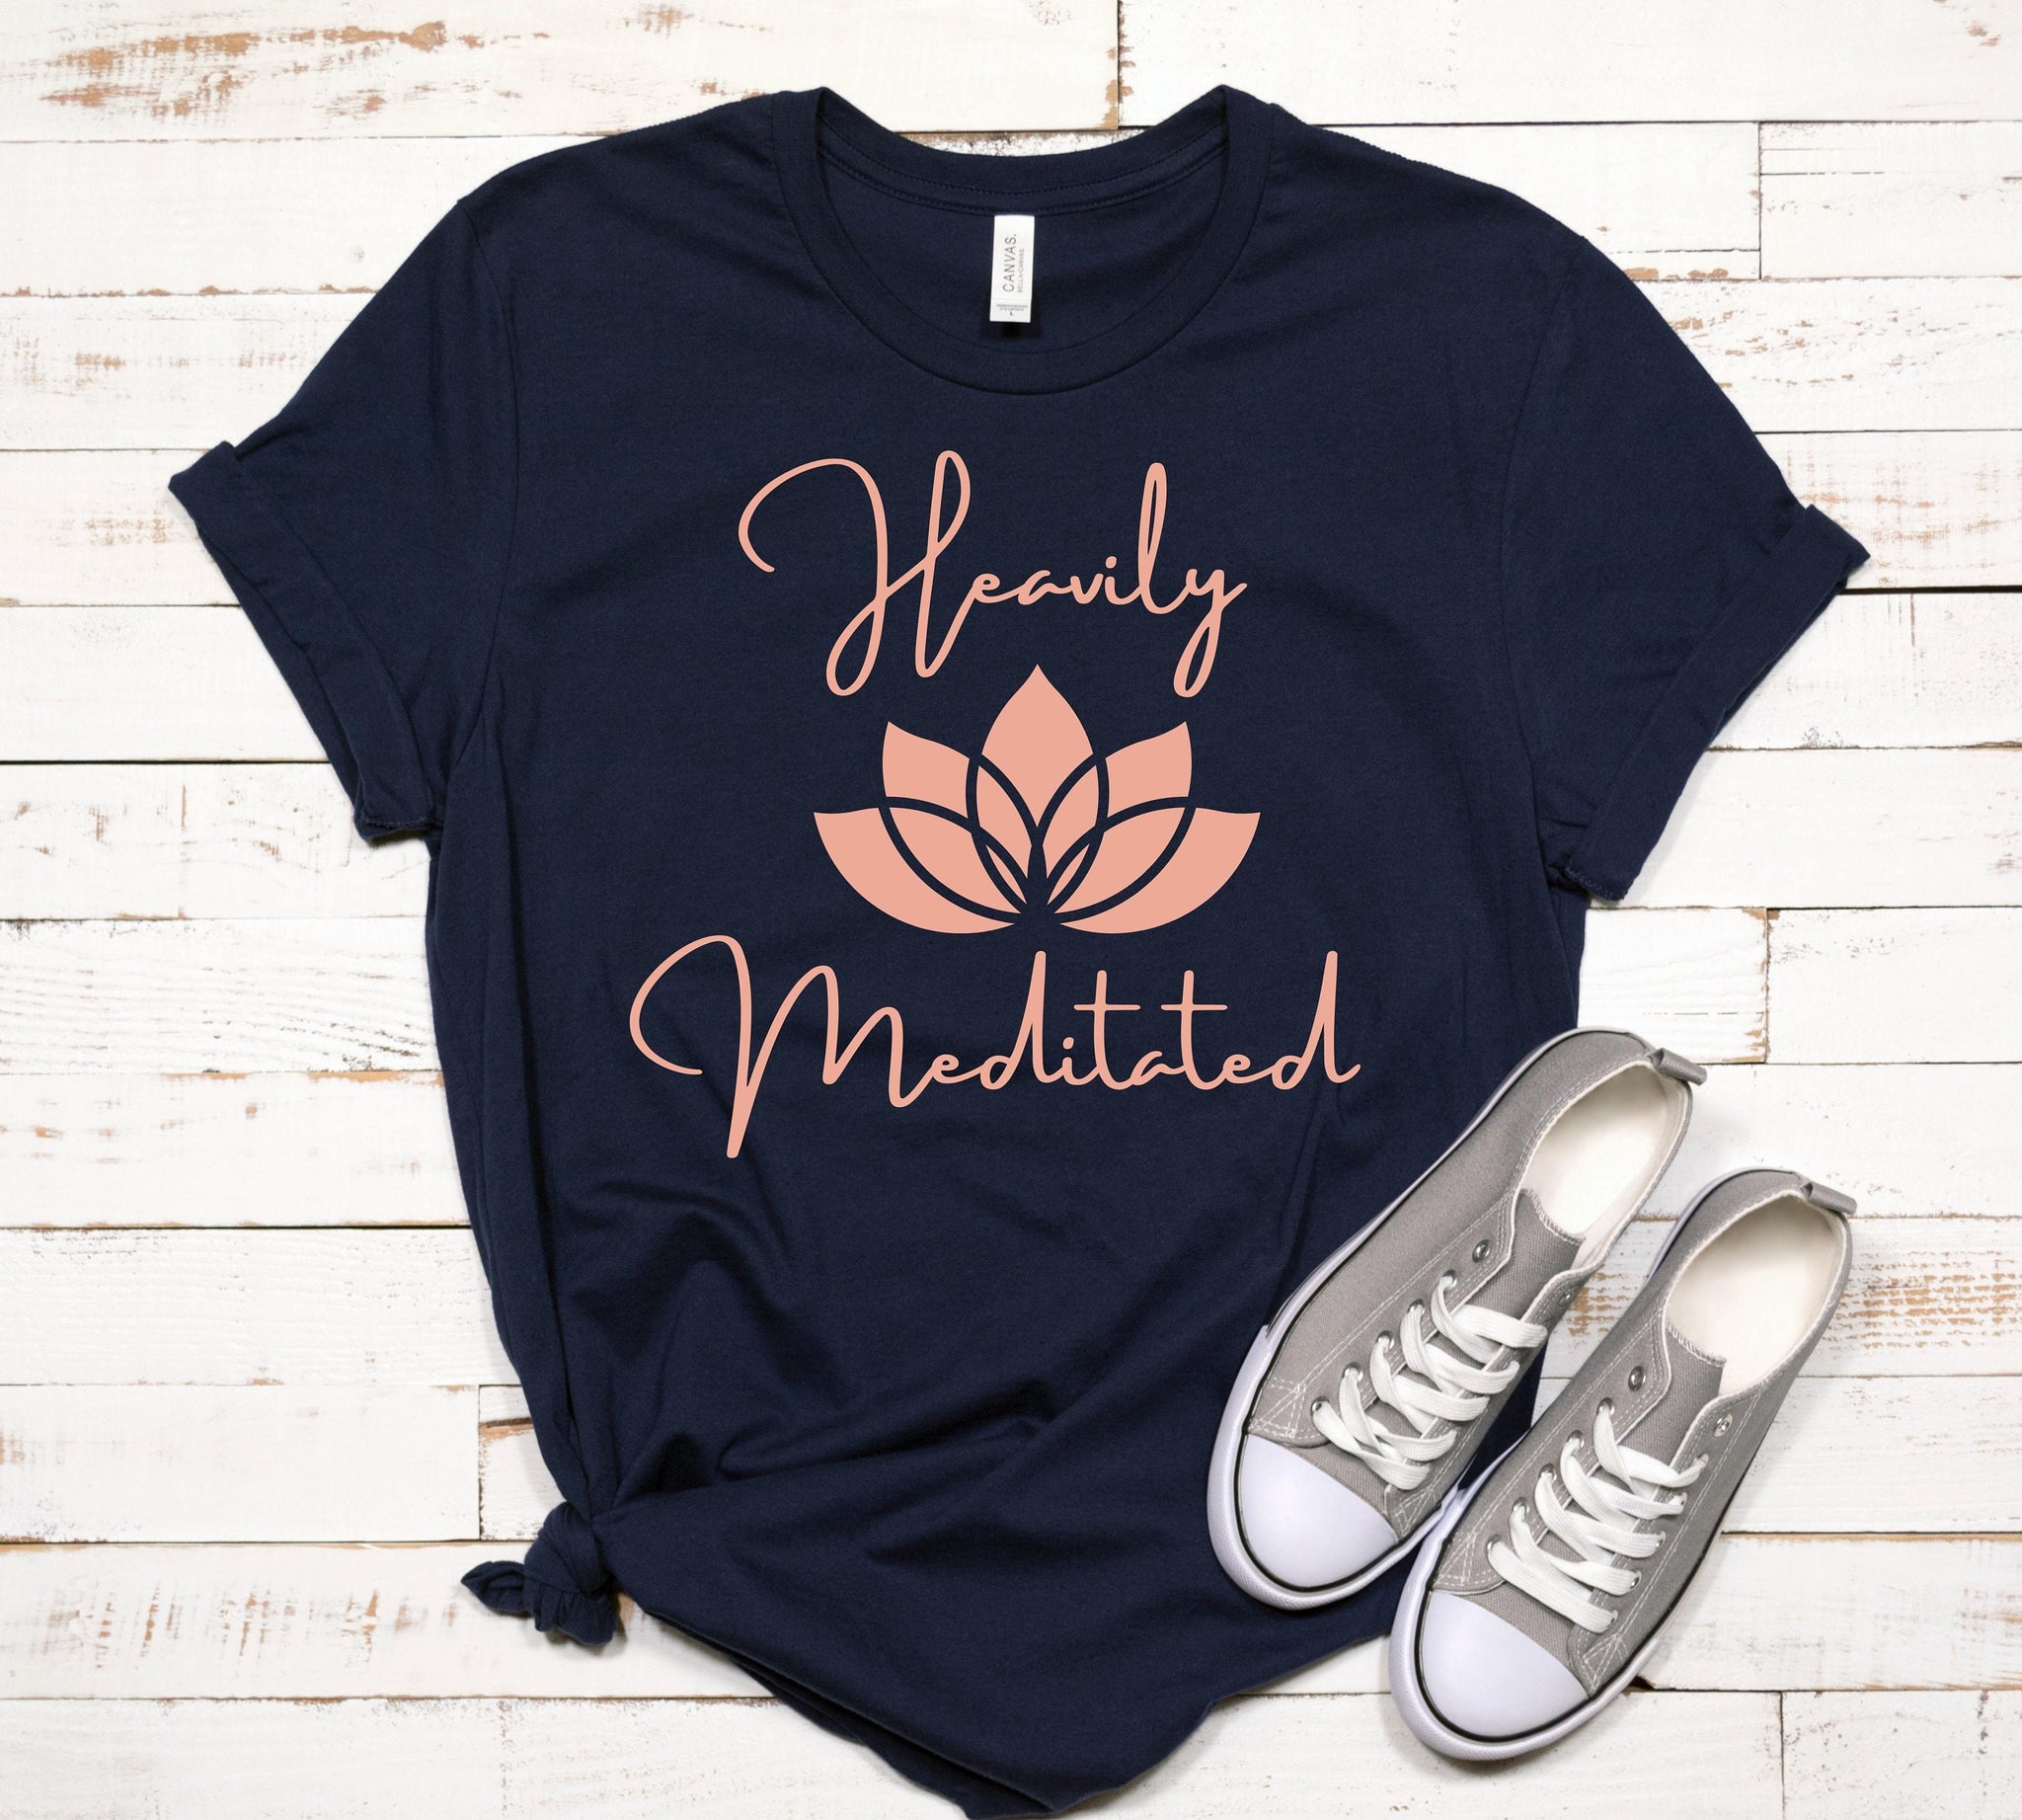 Funny Yoga T-Shirts for Sale